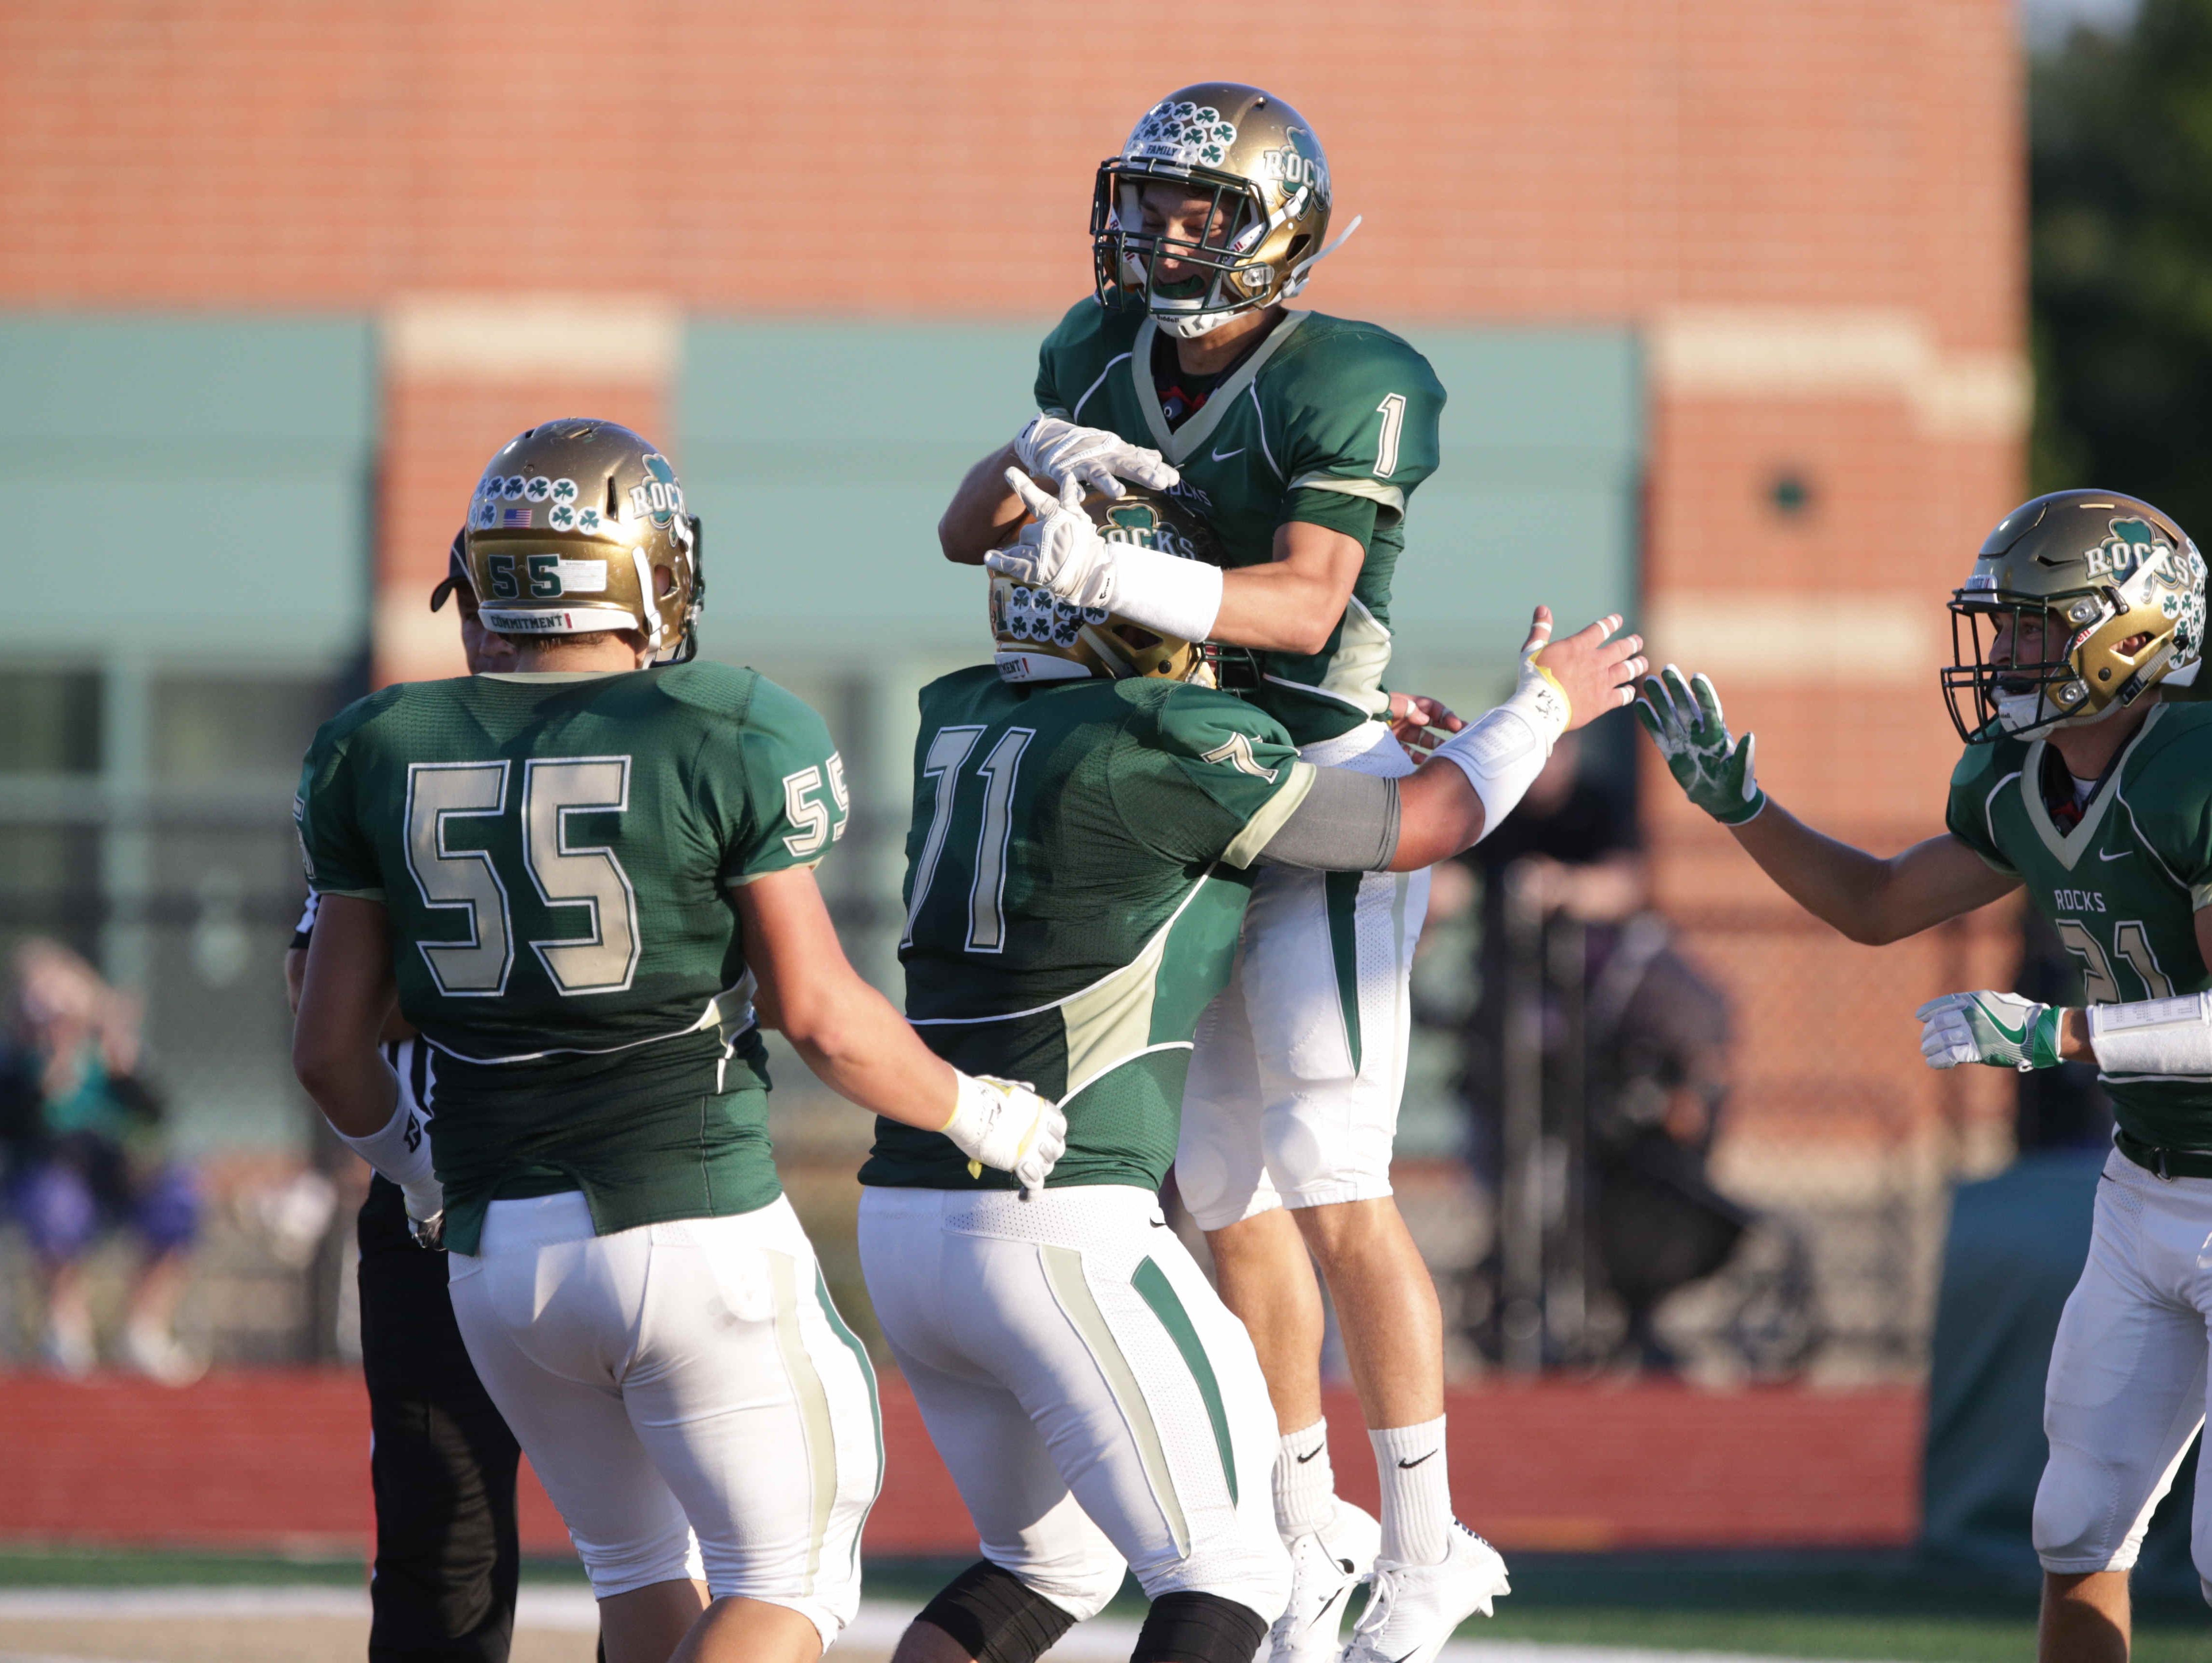 Westfield's No. 1, Evan Manley, celebrates a touchdown with team mates No. 55, Matthwe Robinson, No. 71, Chad Reech, and No. 21, DrewNeustifter, Friday September 2nd, 2016. Westfiled faced off against Zionsville at Westfields's Riverview Health Stadium.